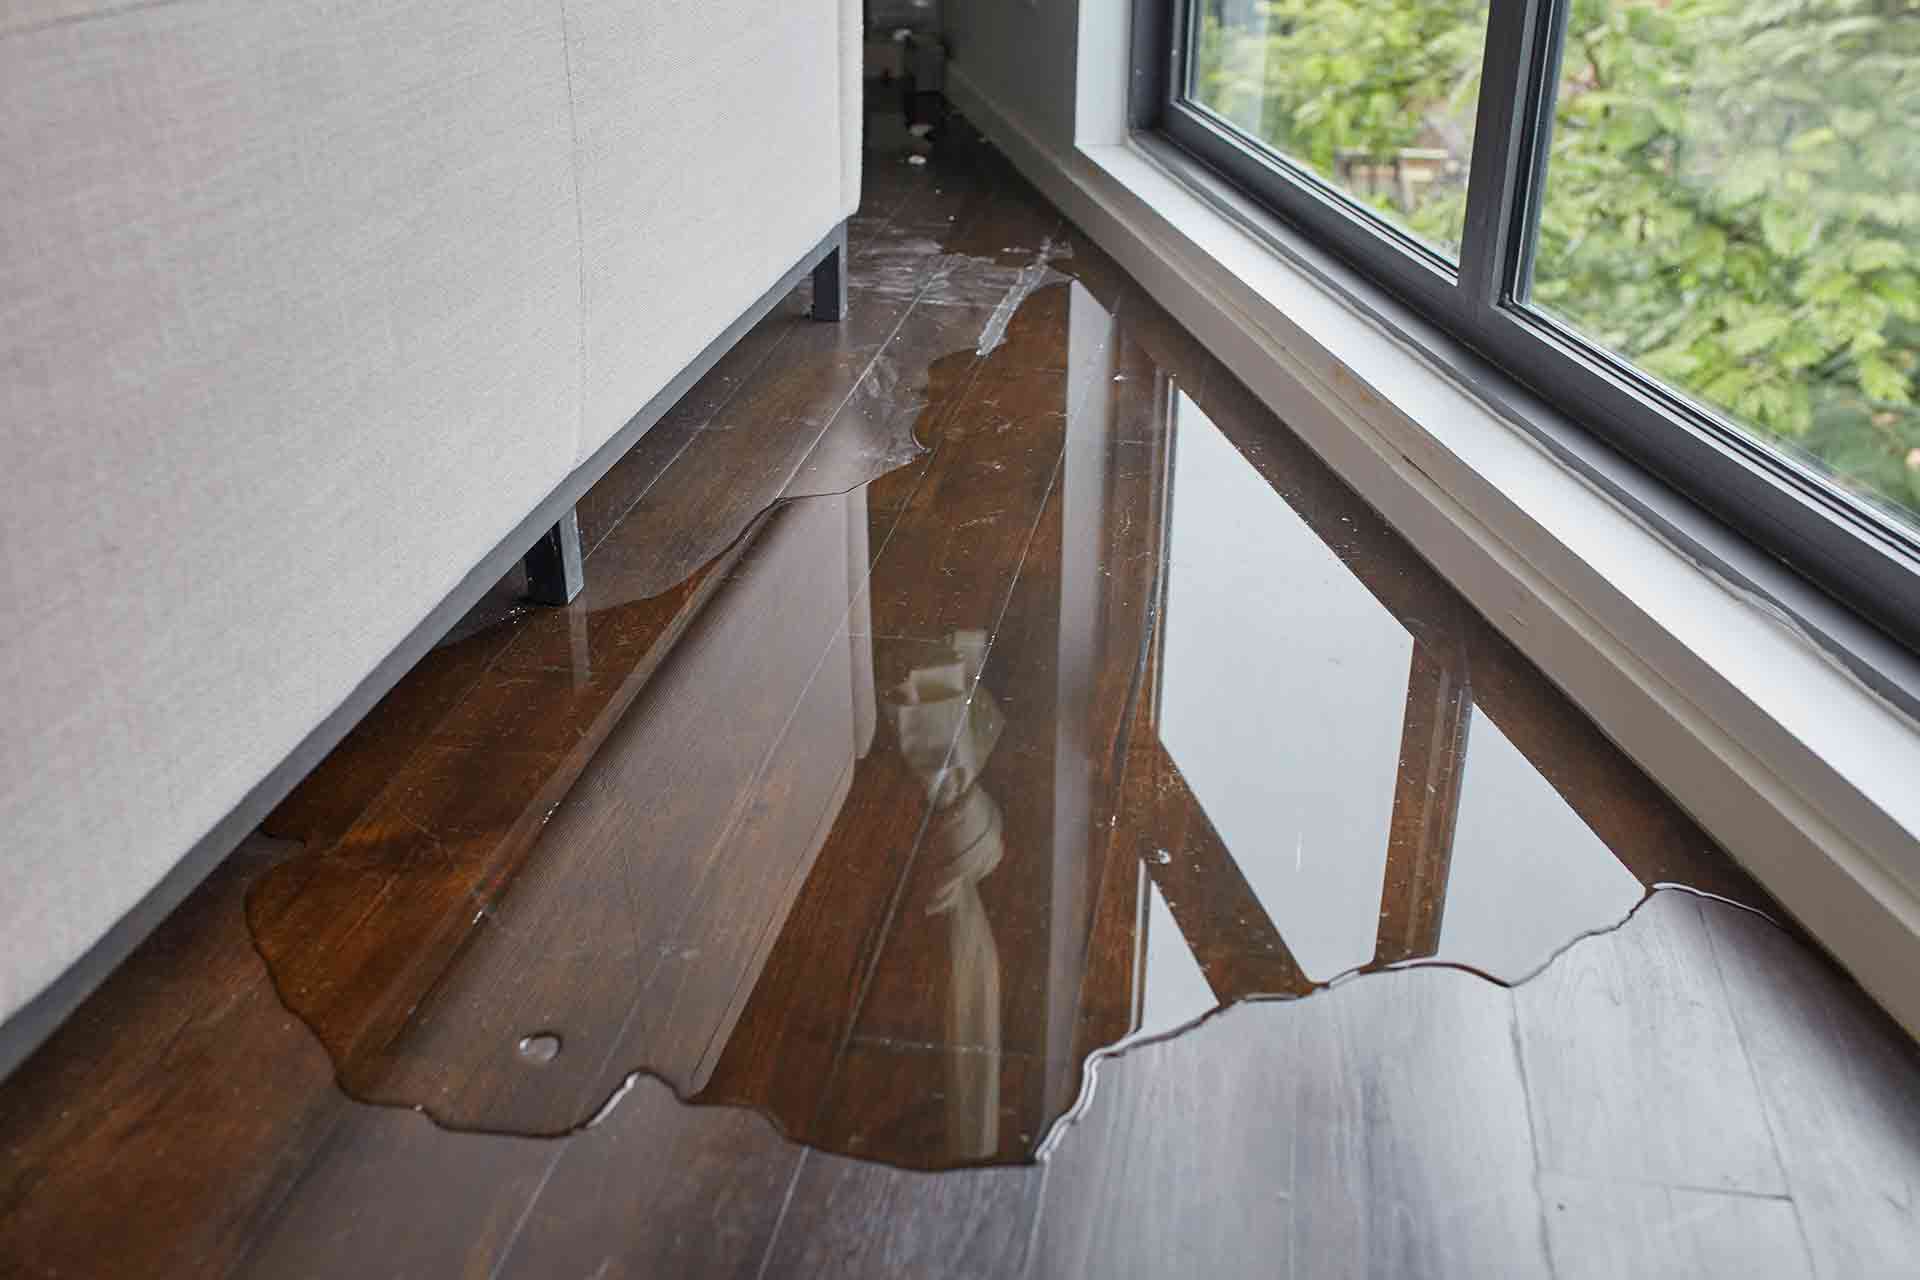 How To Repair Water Damaged Floor How To Repair Water Damaged Floor | Checkatrade